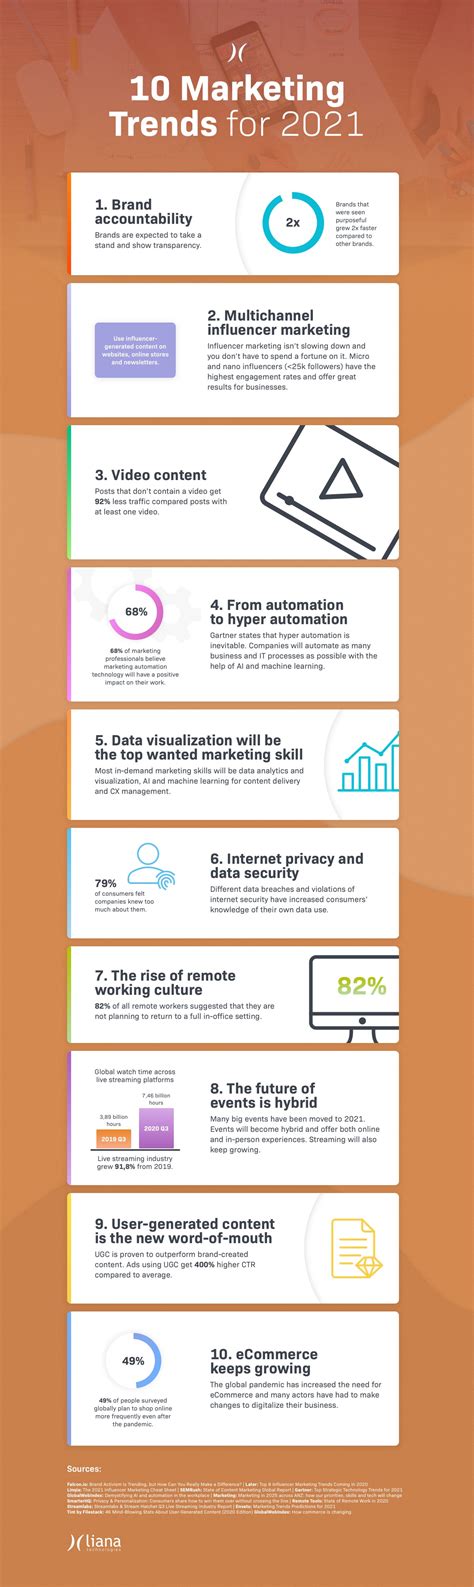 10 Marketing Trends For 2021 Infographic